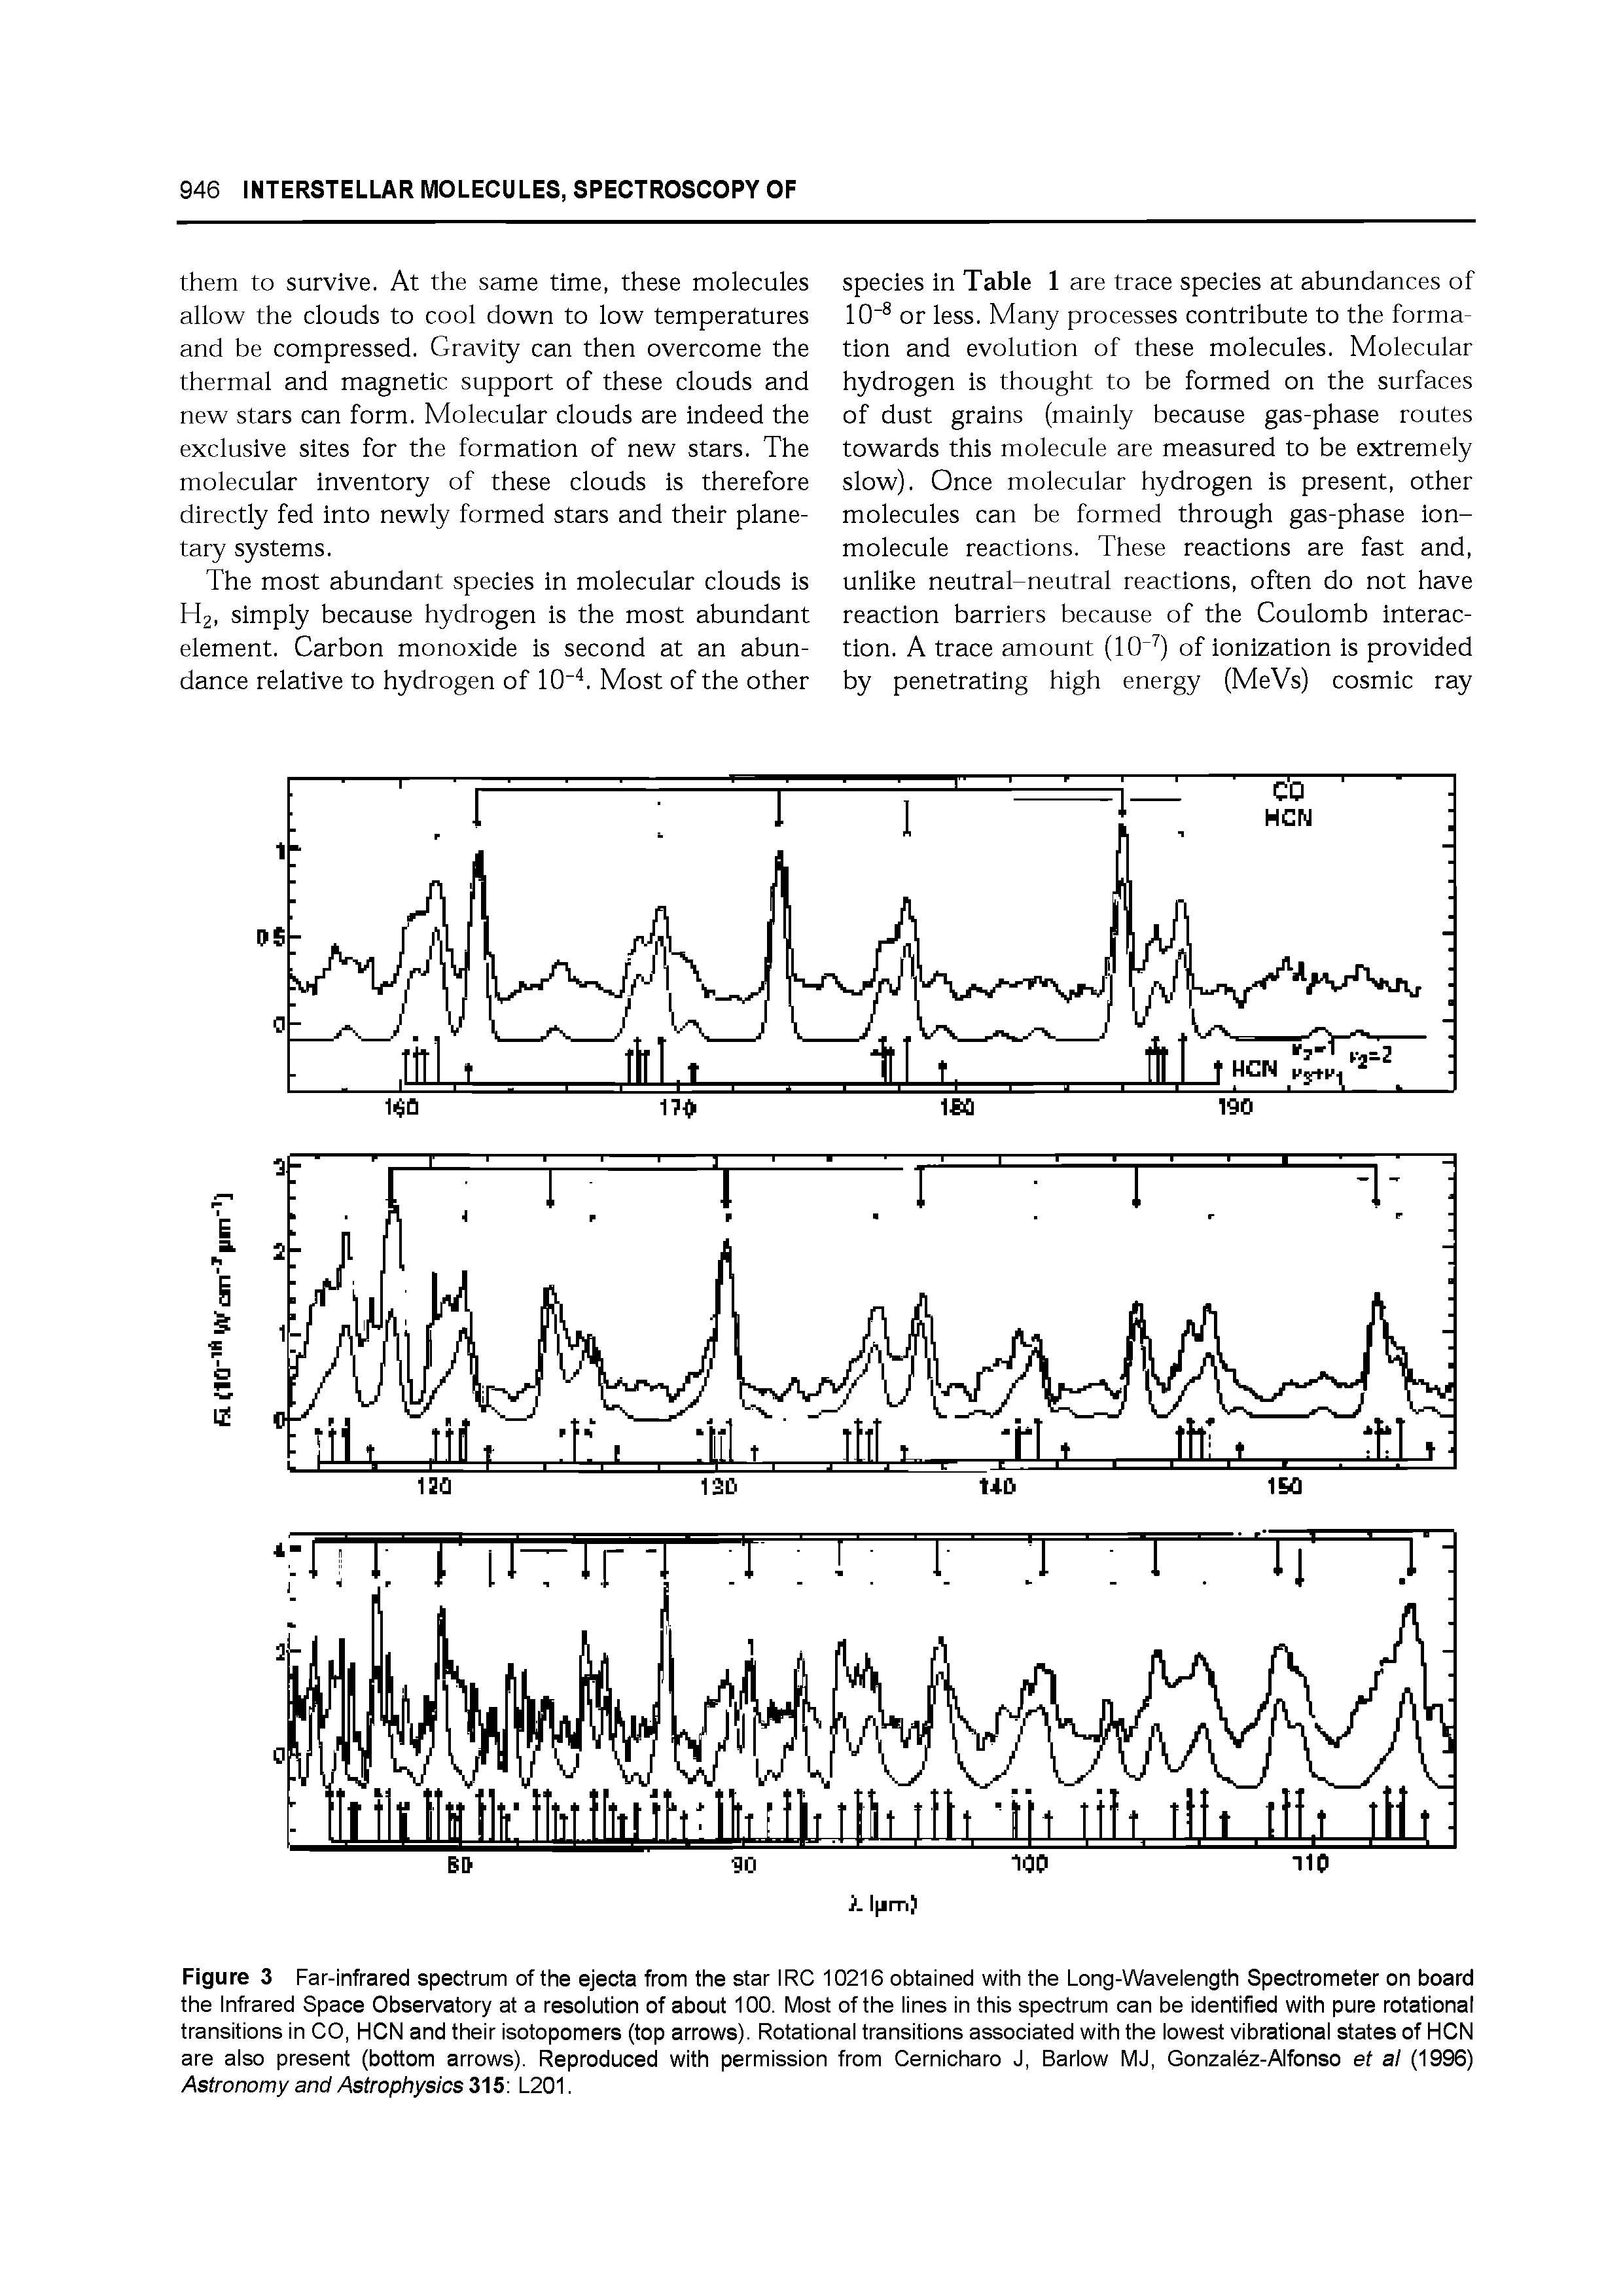 Figure 3 Far-infrared spectrum of the ejecta from the star IRC 10216 obtained with the Long-Wavelength Spectrometer on board the Infrared Space Observatory at a resolution of about 100. Most of the lines In this spectrum can be Identified with pure rotational transitions In CO, HCN and their Isotopomers (top arrows). Rotational transitions associated with the lowest vibrational states of HCN are also present (bottom arrows). Reproduced with permission from Cernicharo J, Barlow MJ, Gonzalez-Alfonso et al (1996) Astronomy and Astrophysics 315 L201.